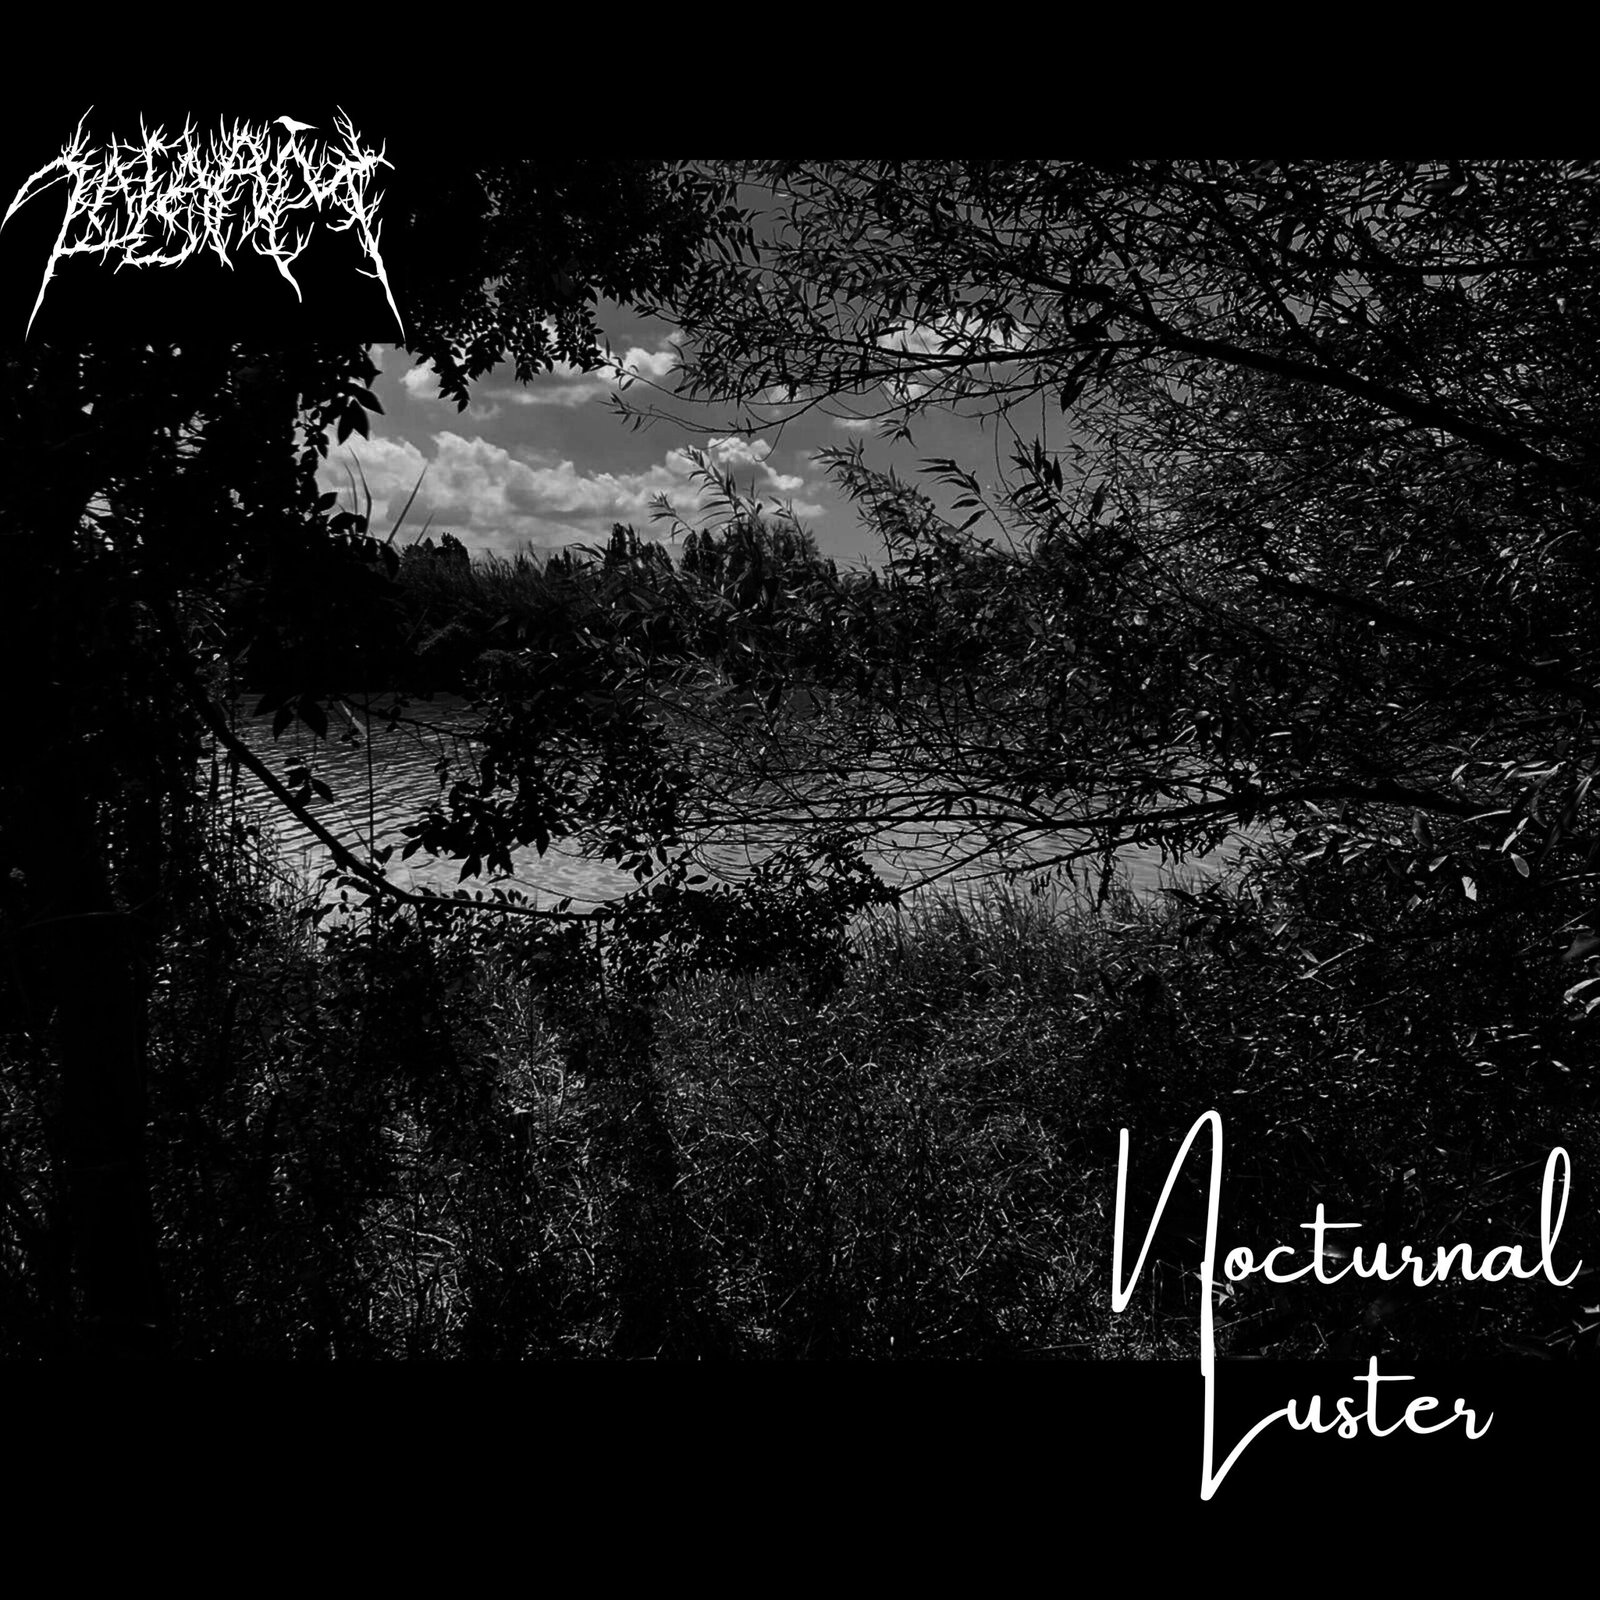 Zalaam – Nocturnal Luster